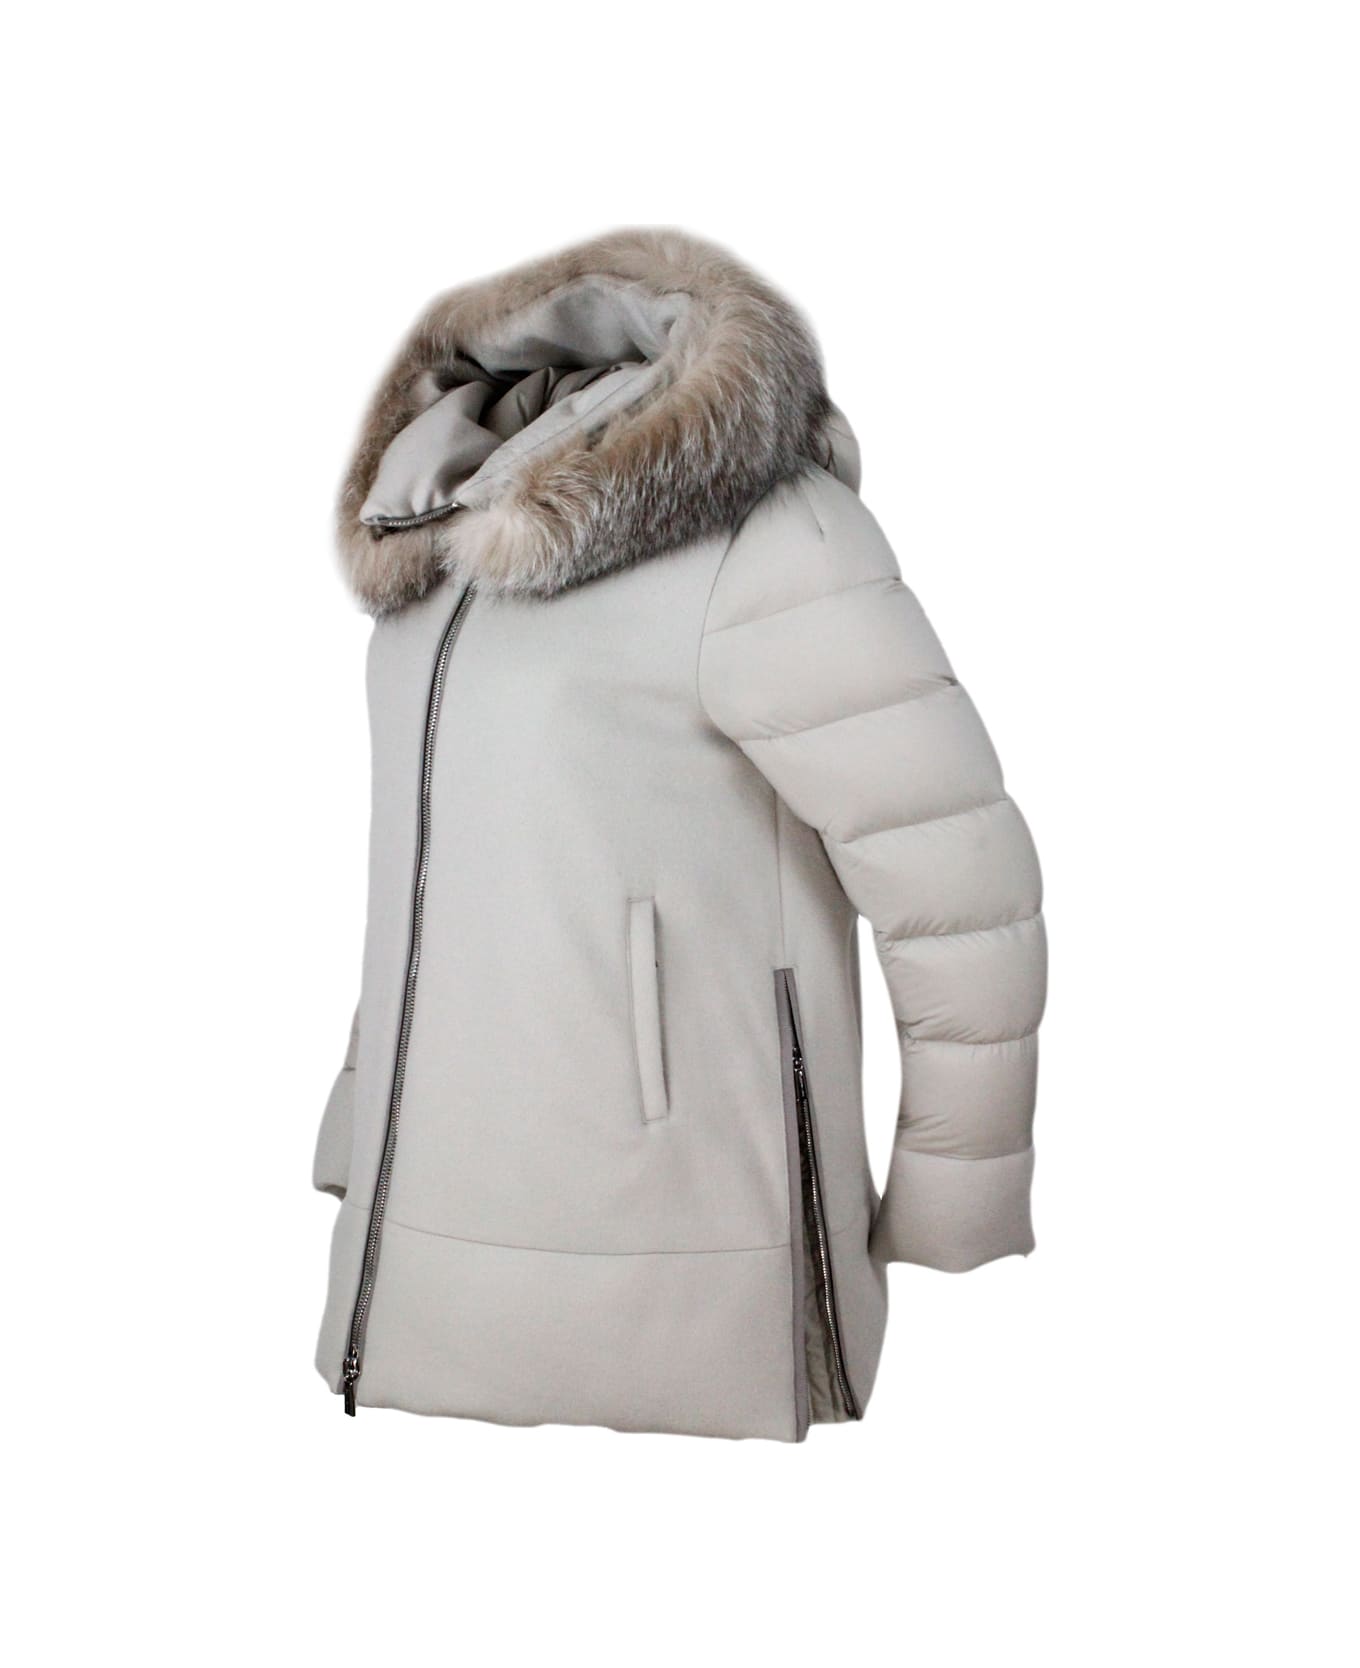 Moorer Down Quilted Wool And Cashmere Jacket With Nylon Sleeves And Hood With Detachable Fox Fur - Marble